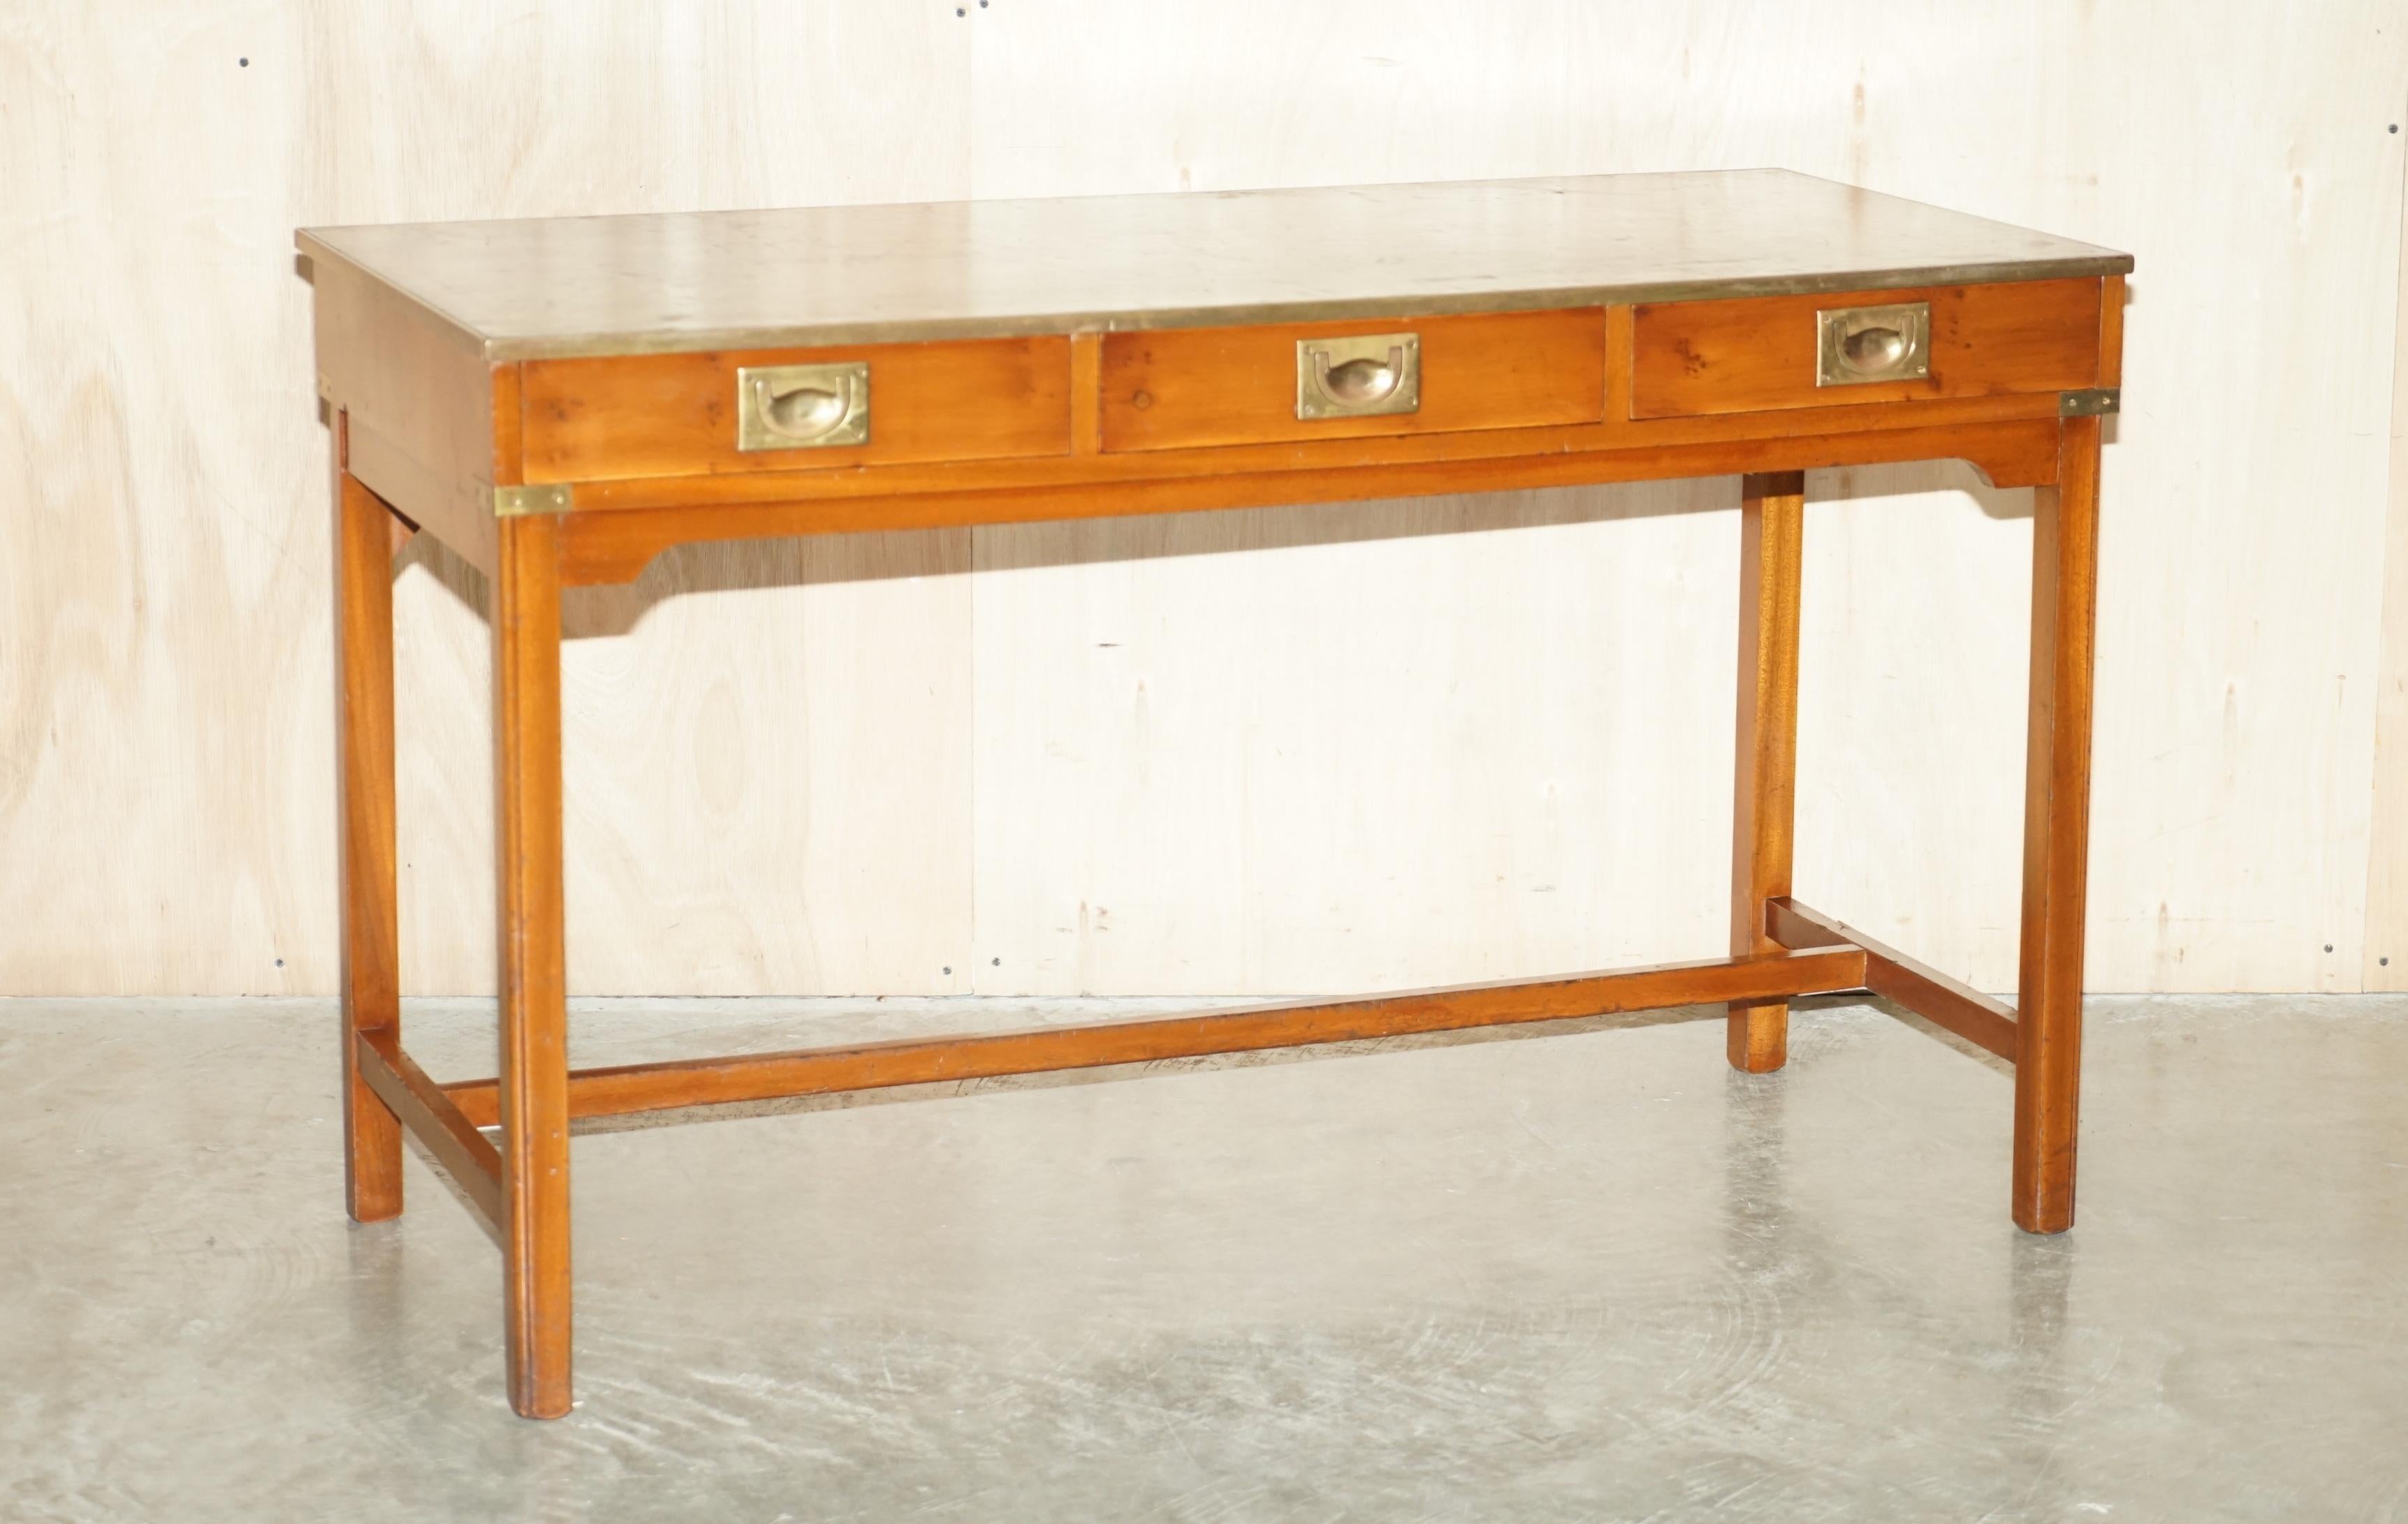 Royal House Antiques

Royal House Antiques is delighted to offer for sale this lovely handmade in England Burr Yew wood Harrods Kennedy Military Campaign writing table desk with Green leather writing surface

Please note the delivery fee listed